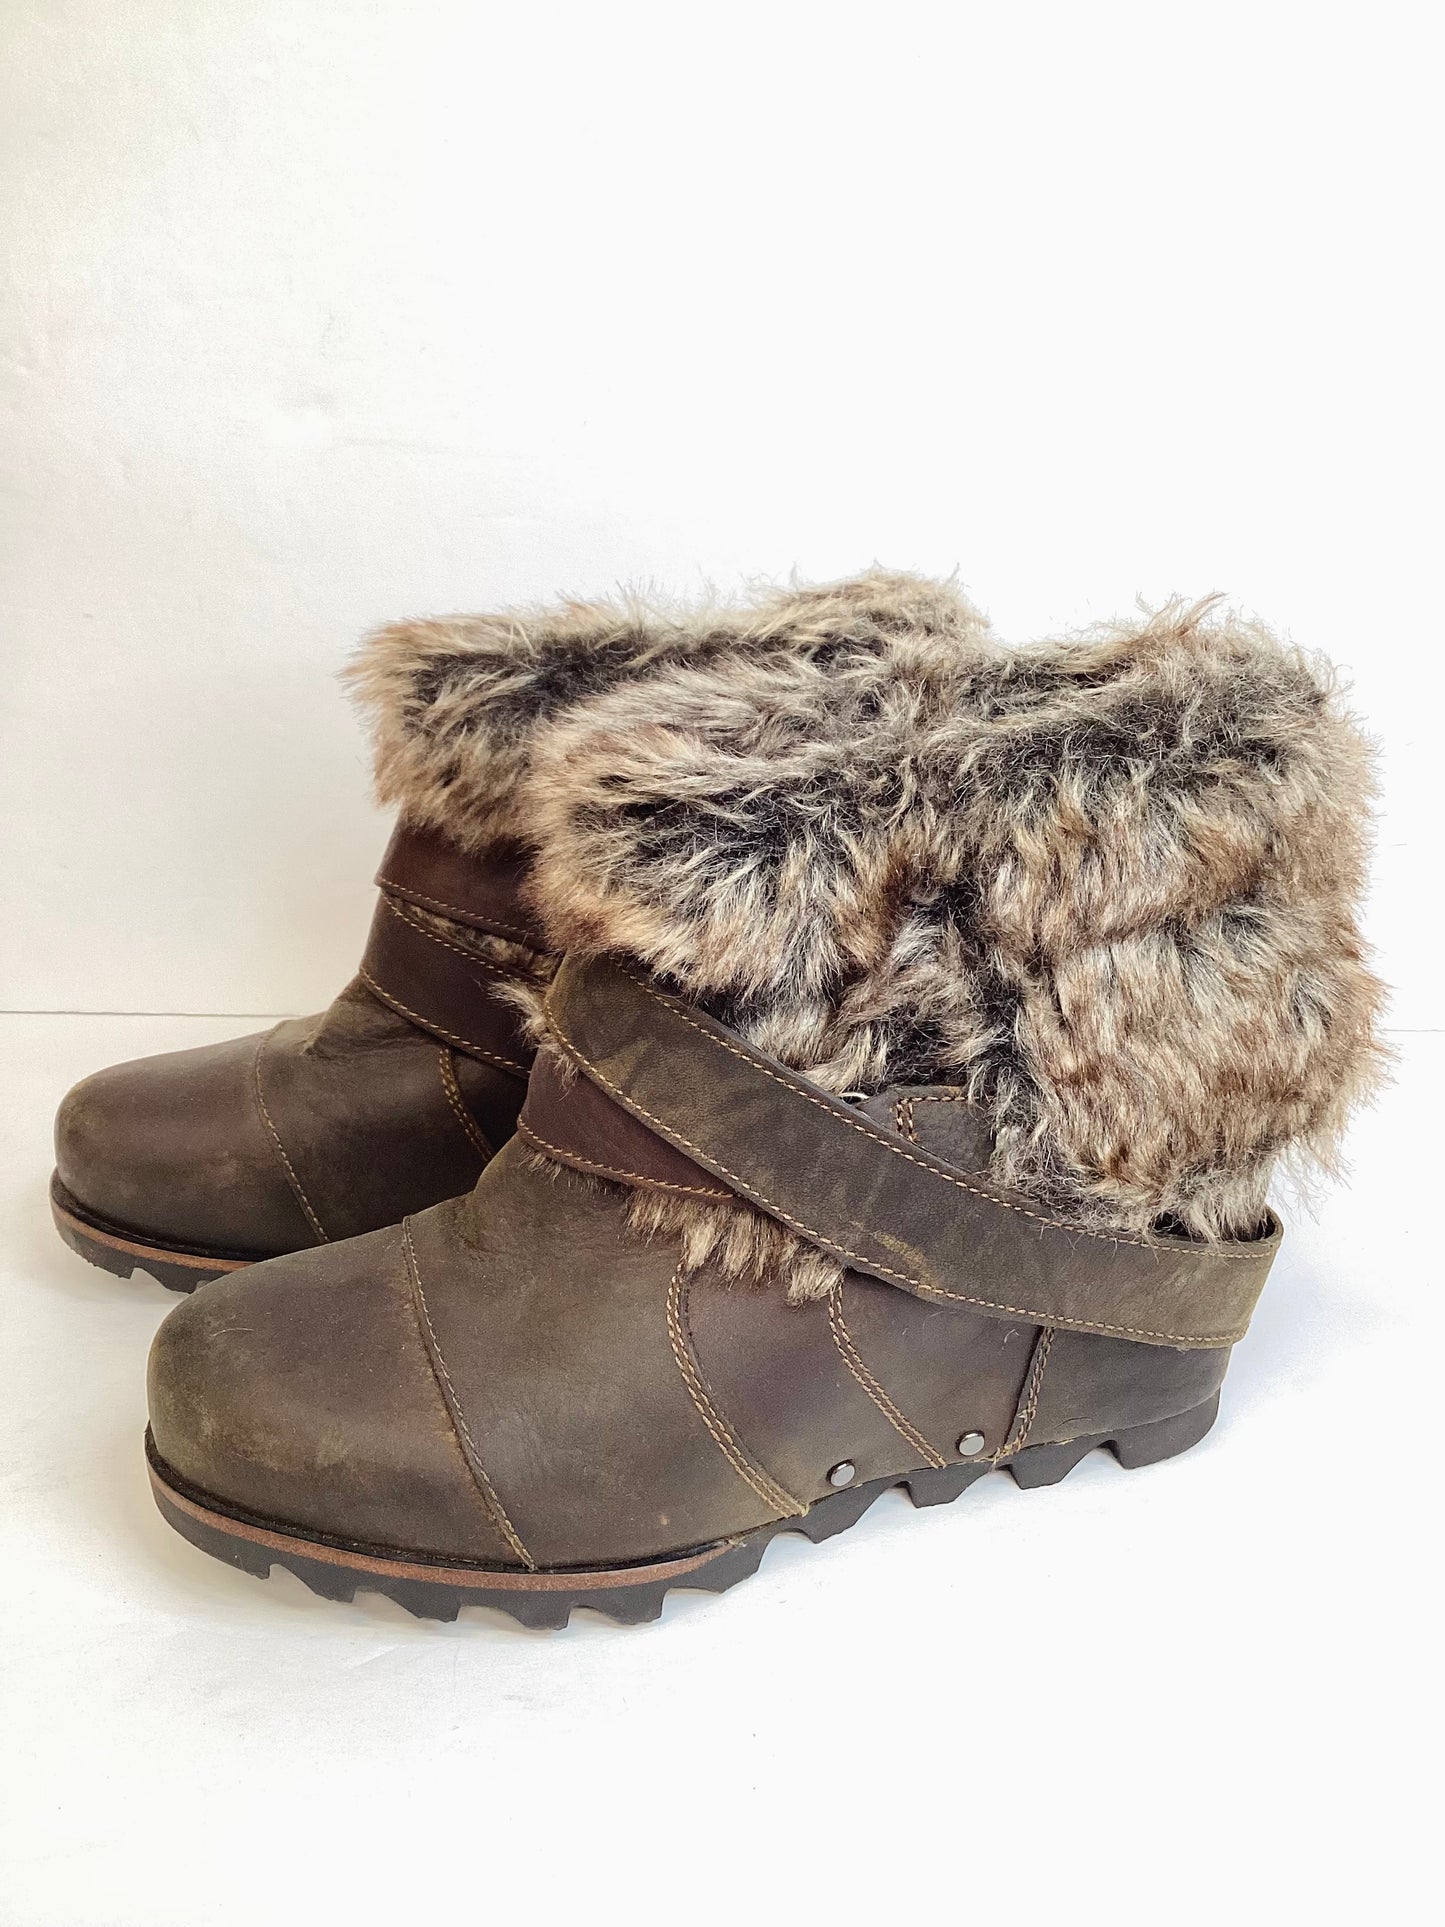 Boots Ankle Heels By Sorel  Size: 7